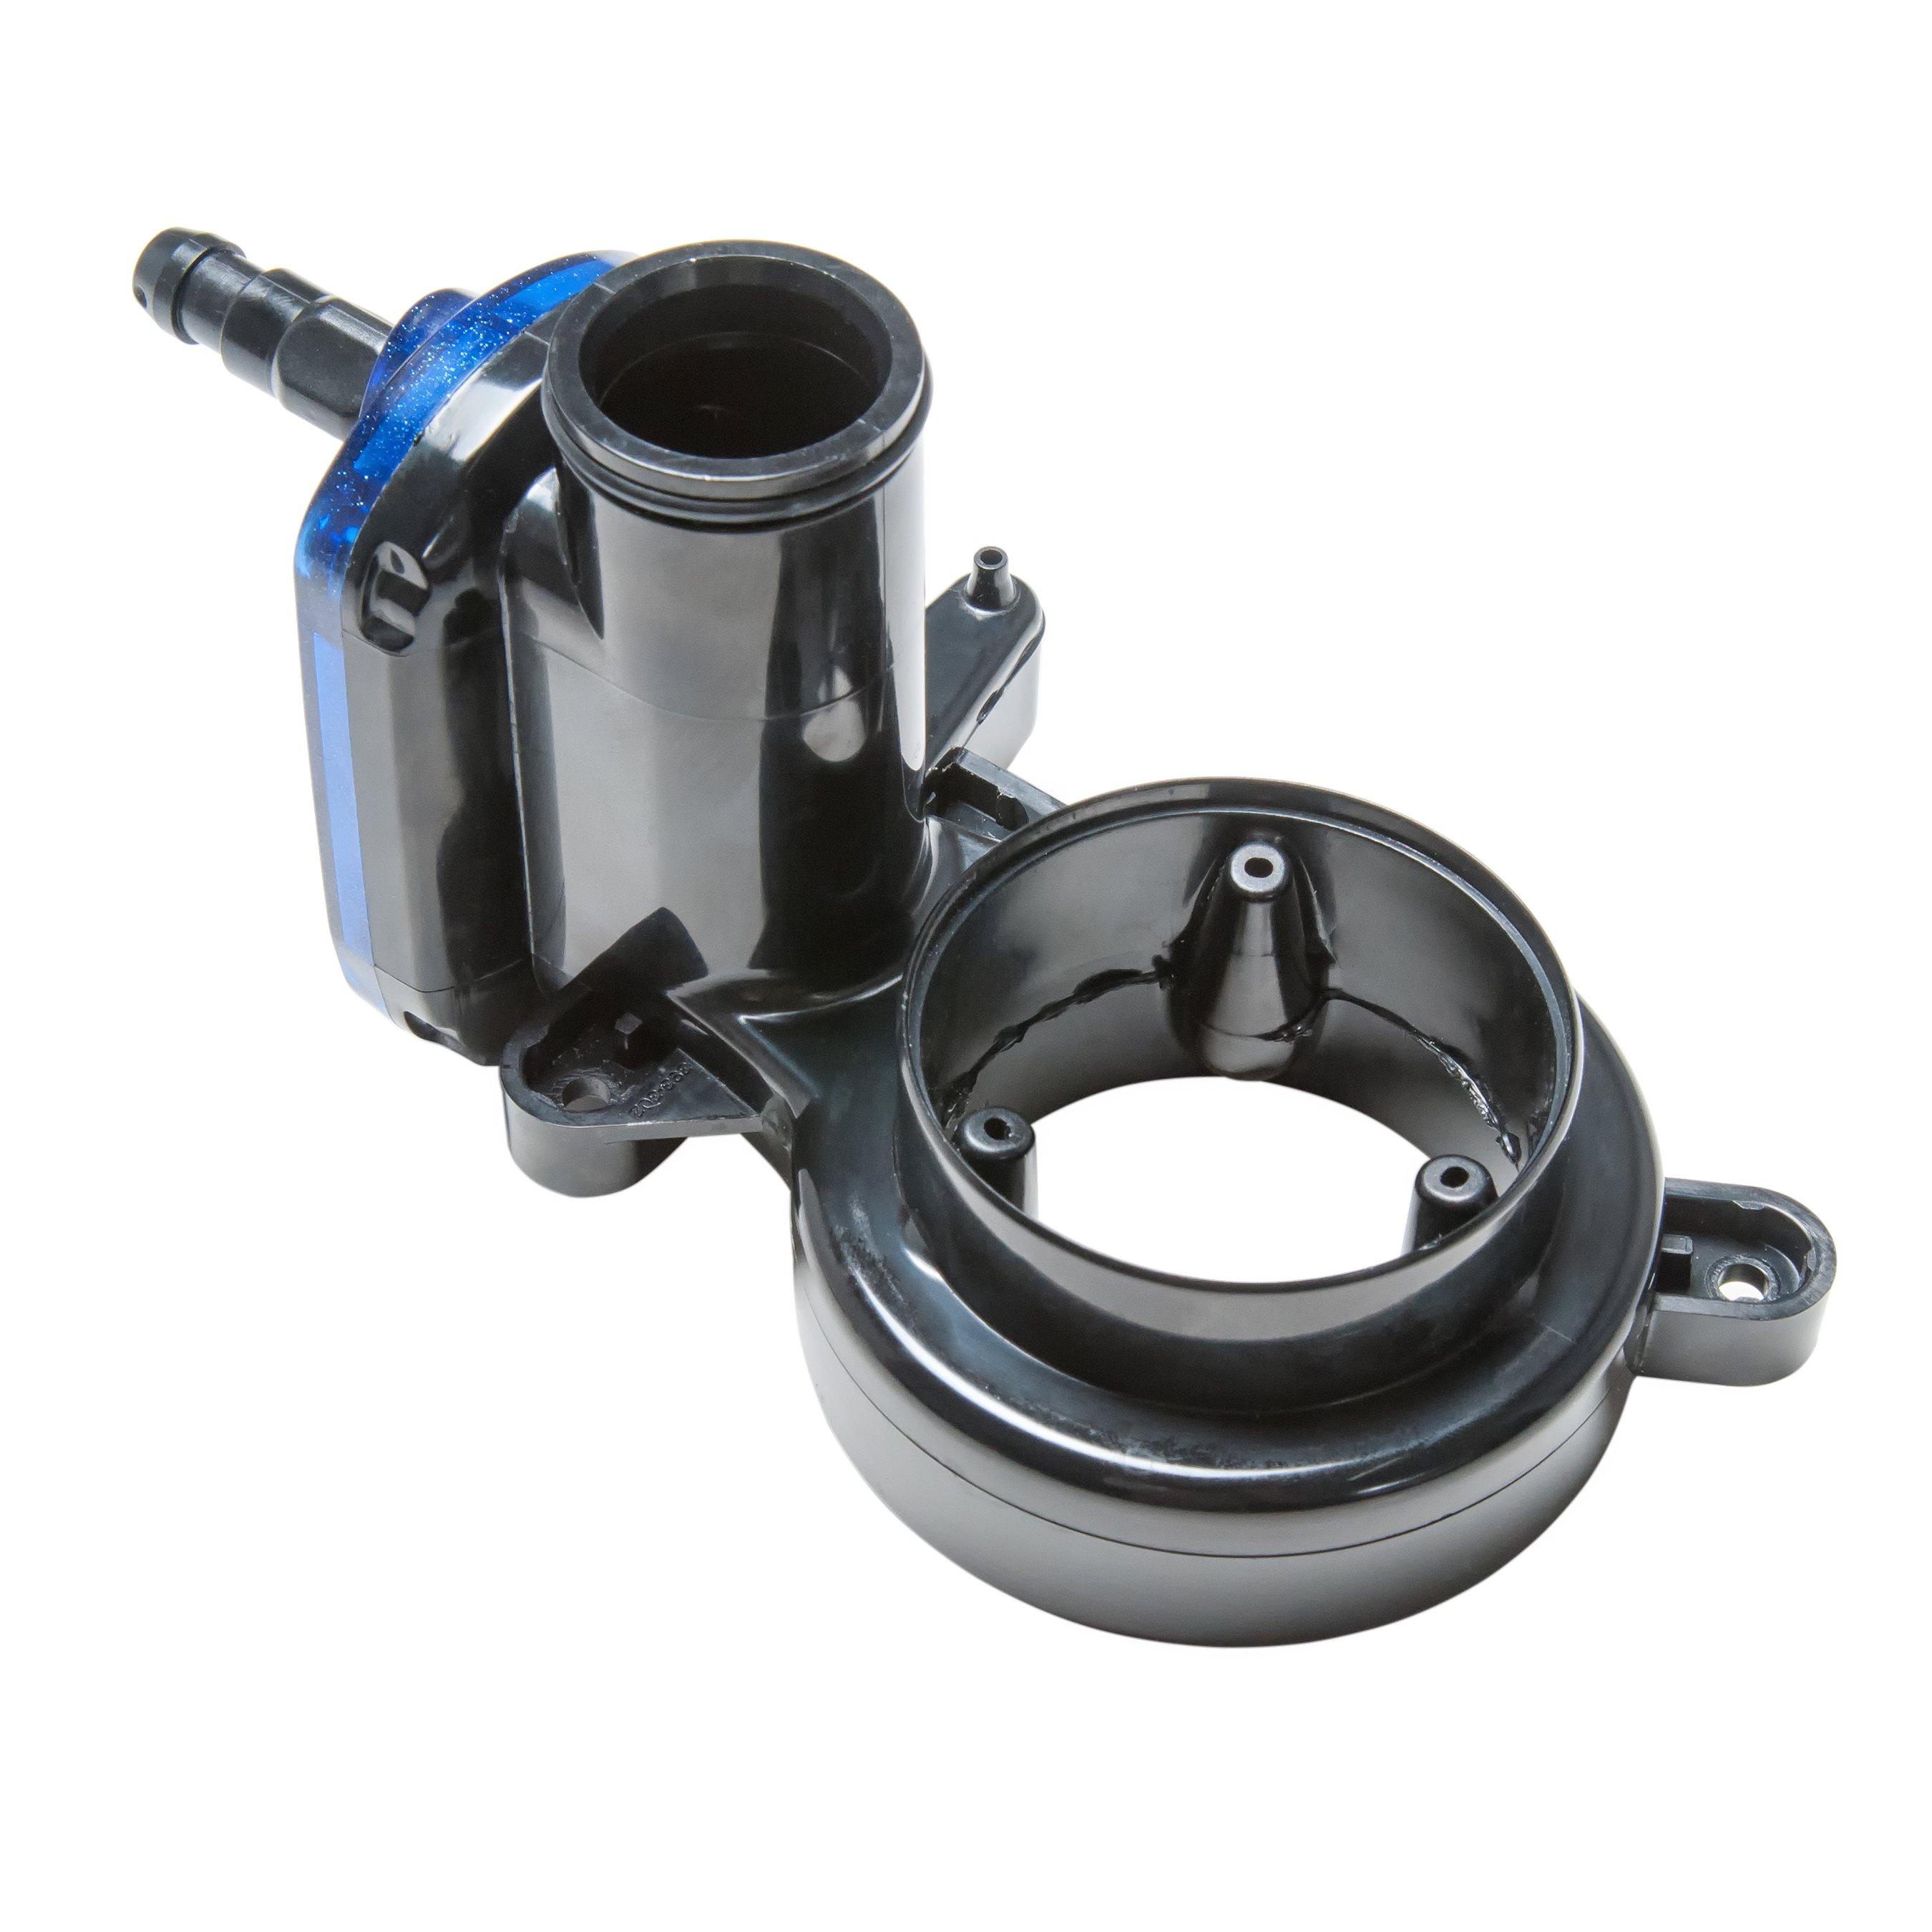 Polaris - Water Management System Assembly with O-Ring for 3900